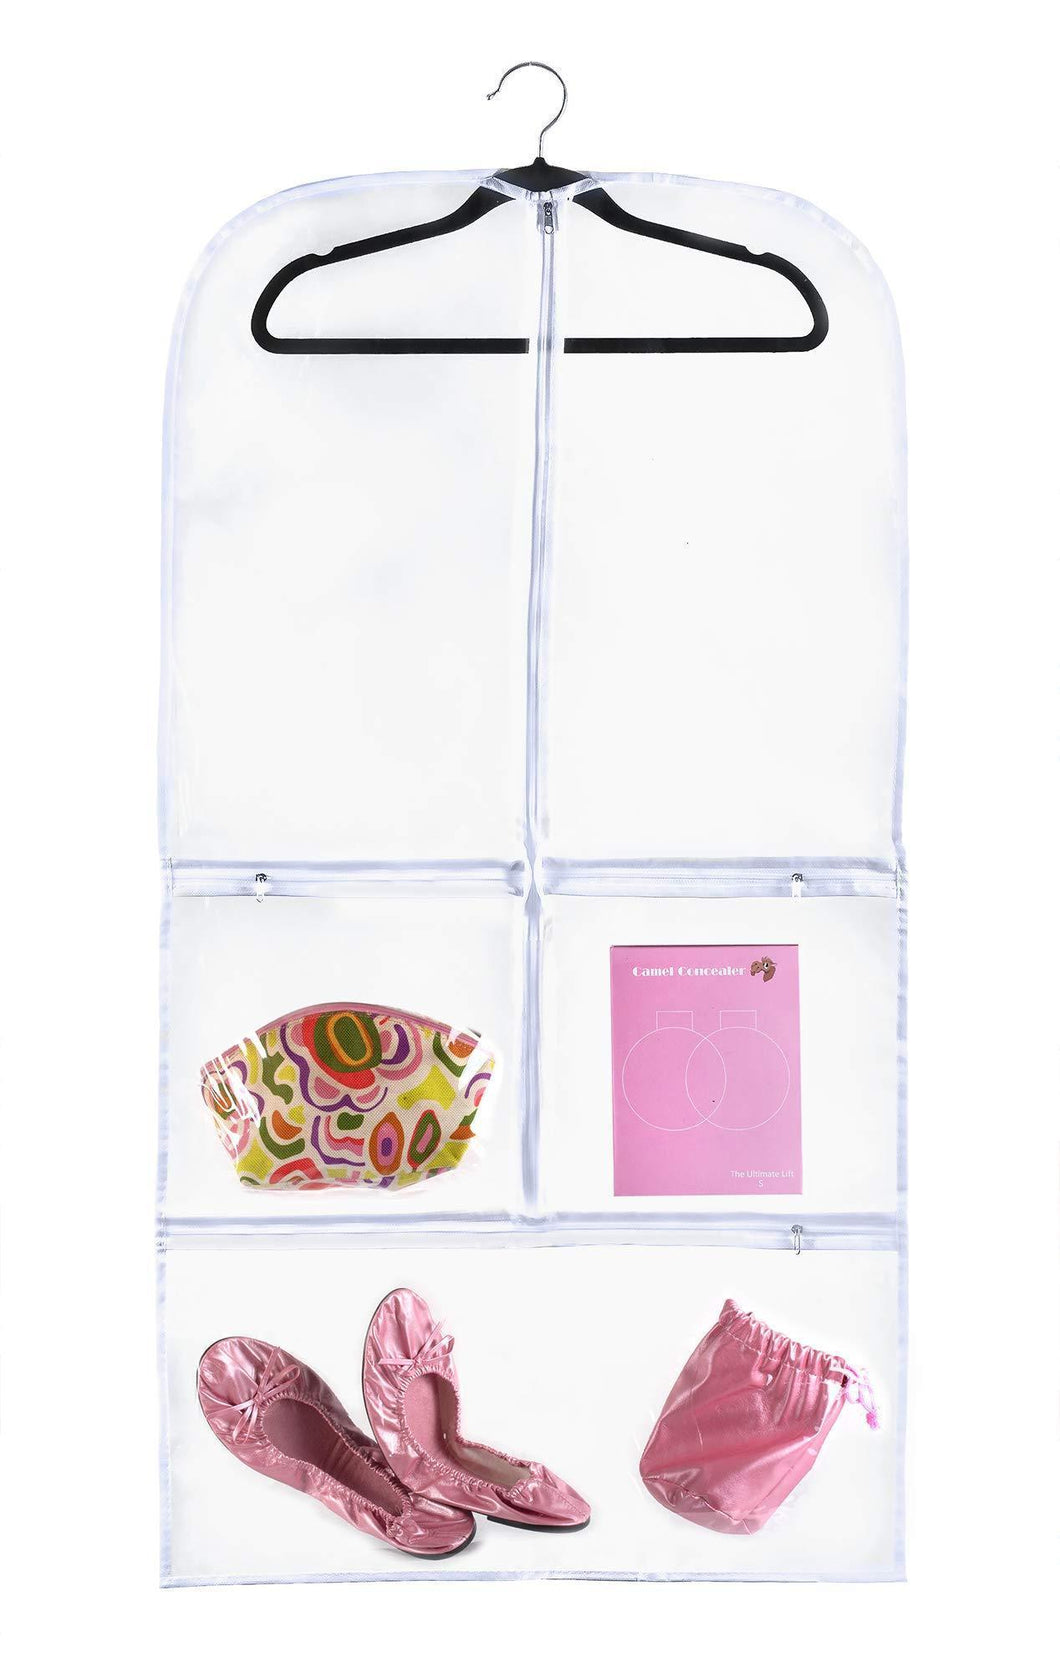 Discover the clear gusseted suit garment bag 20 inch x 38 inch x 3 inch dance dress and costumes hanging travel storage for clothes shoes and accessories water resistant organizer